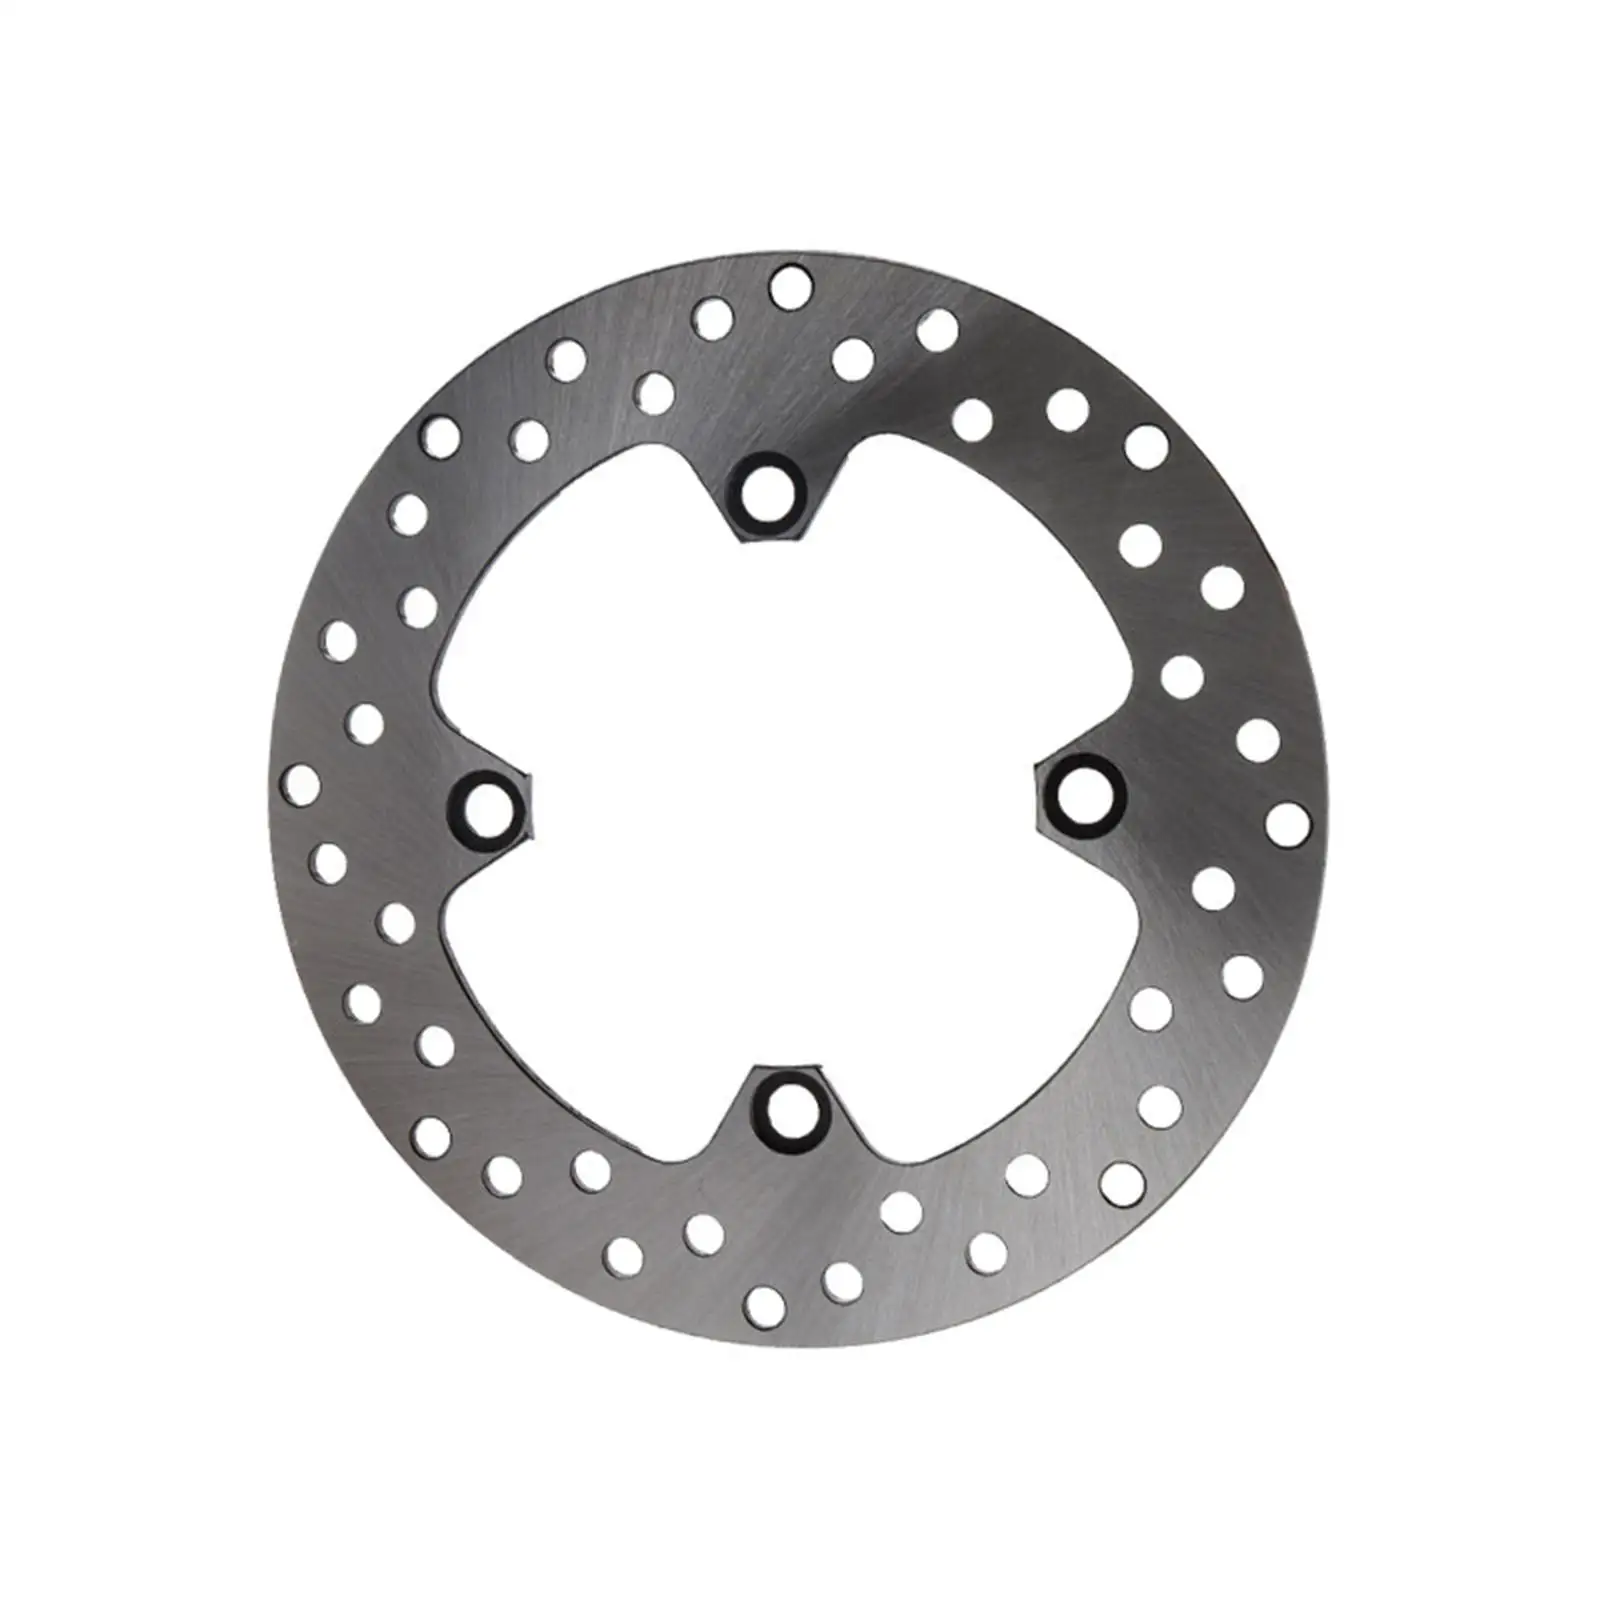 Brake Disc Rotor Easy to Install Direct Replaces Sturdy Accessories for Honda XR250R CBR125R Xlv Varasx125 TRX400EX